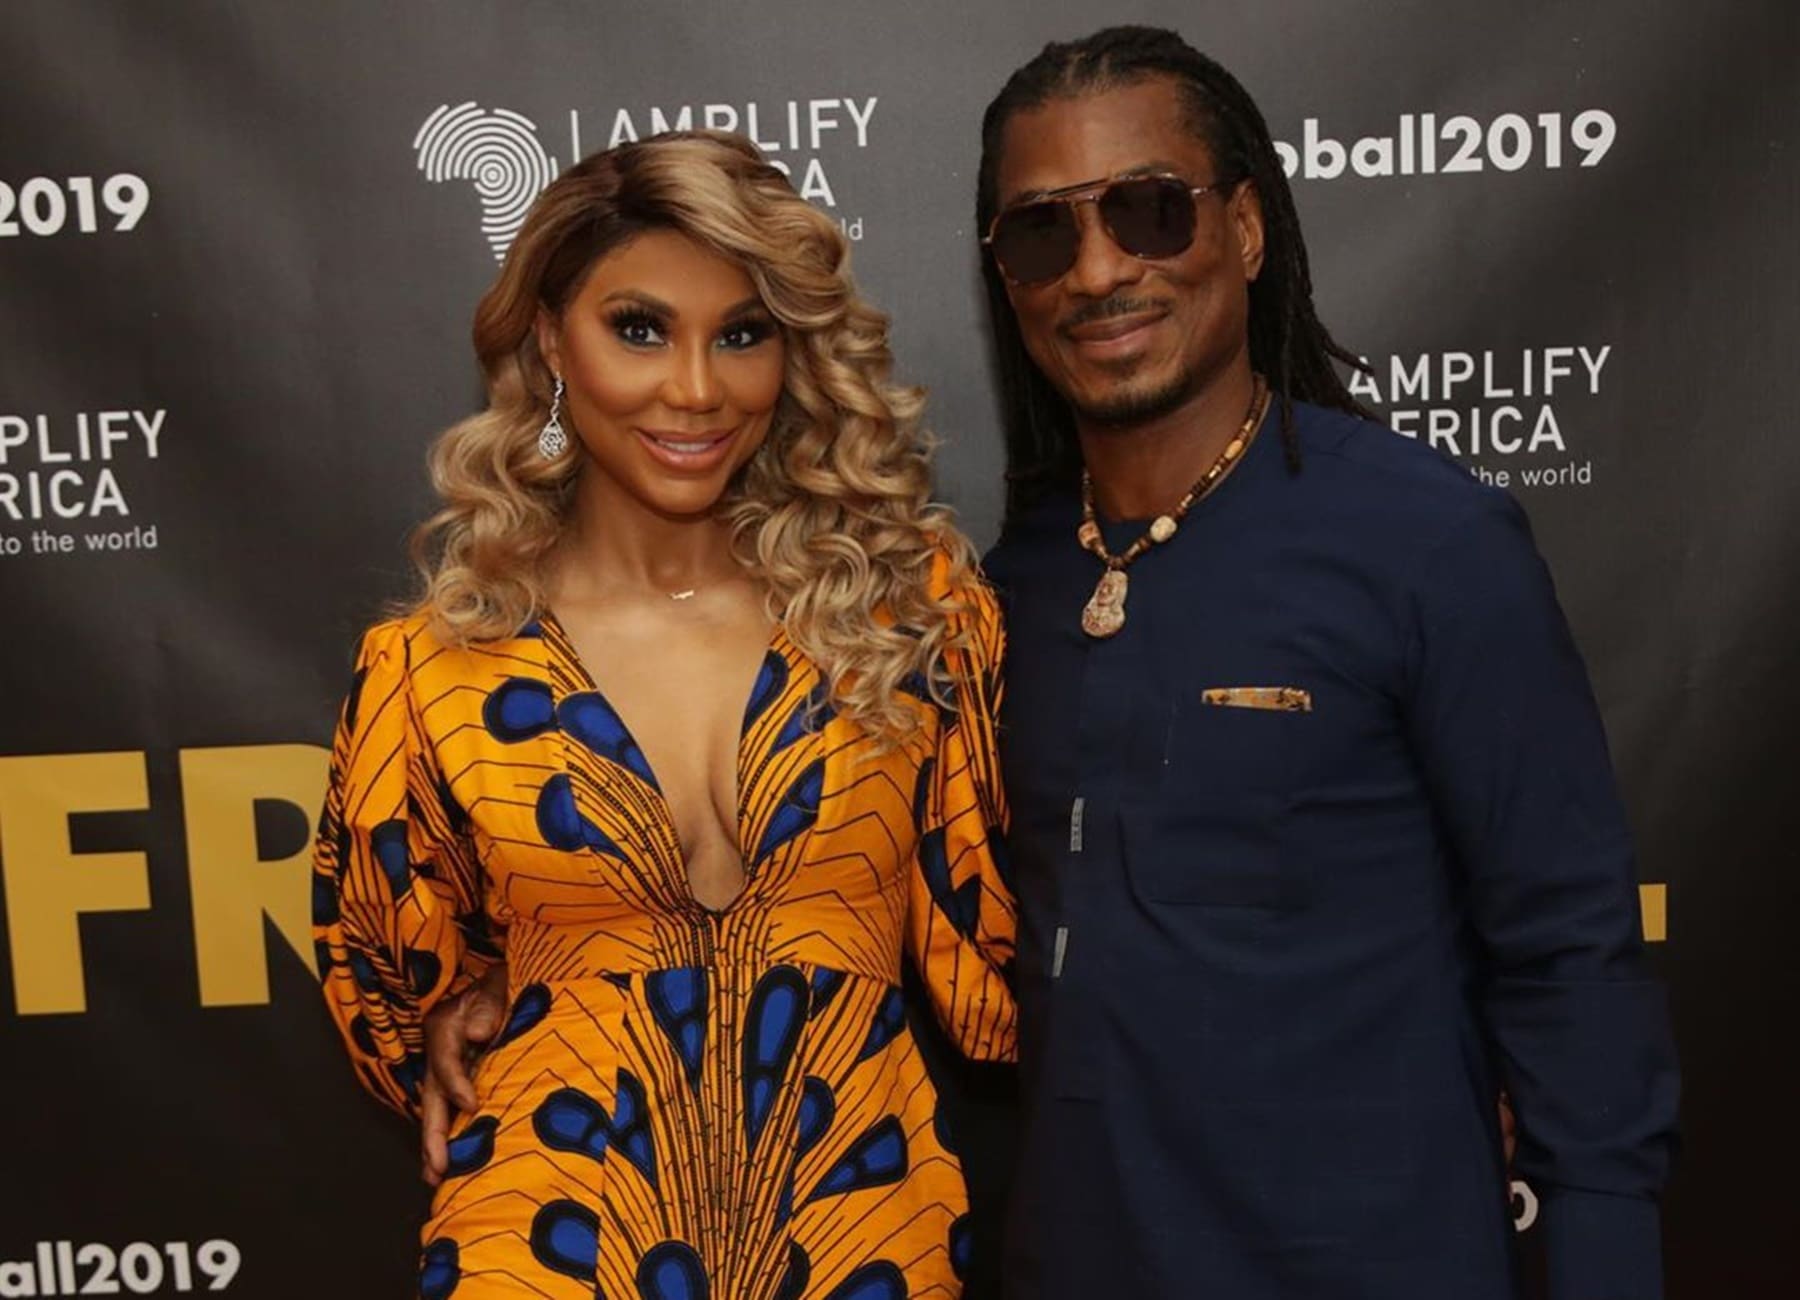 Tamar Braxton's BF, David Adefeso Encourages Fans And Says: 'Together We Shall Rise'